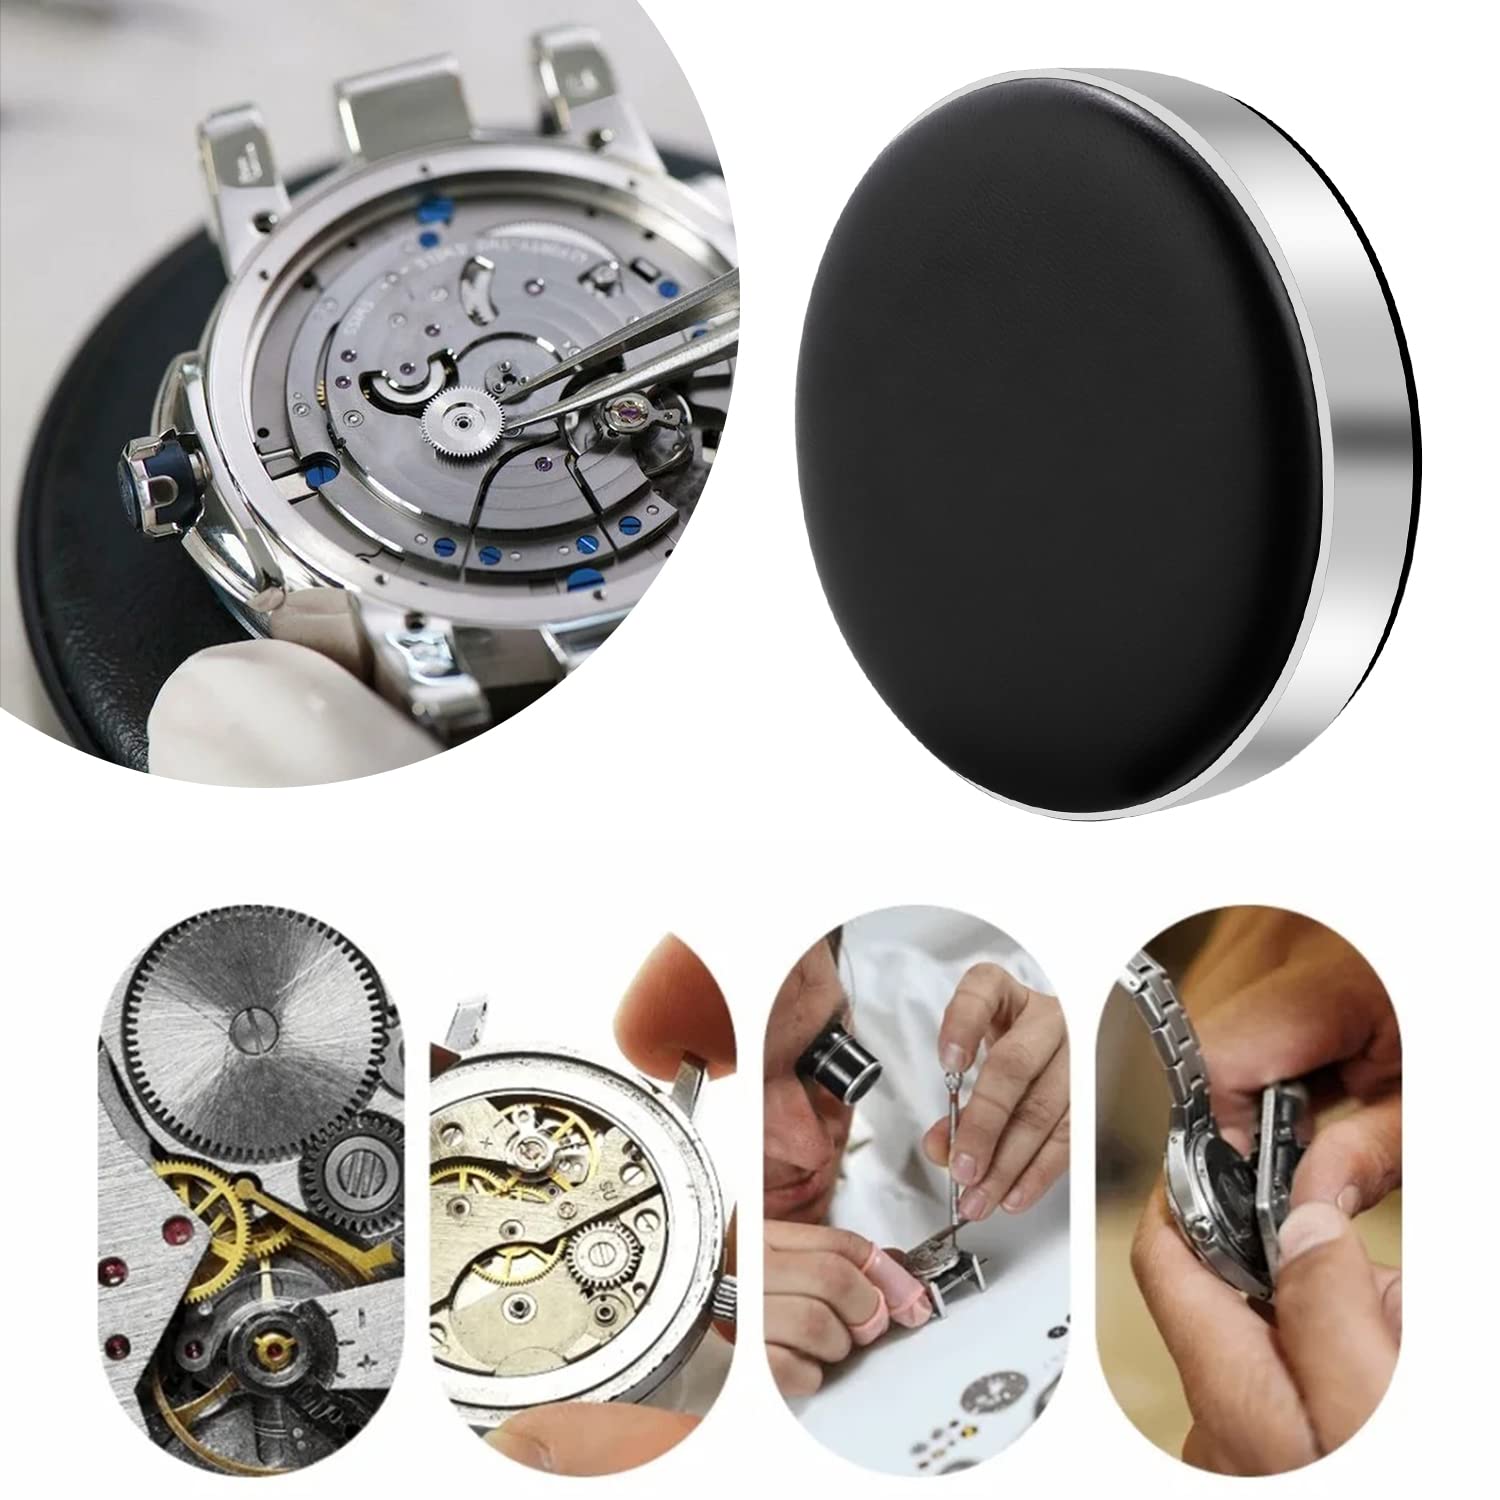 Watch Cushion Watch Case Casing Cushion Pad Holder Movement Changing Battery Repair Kit Tool